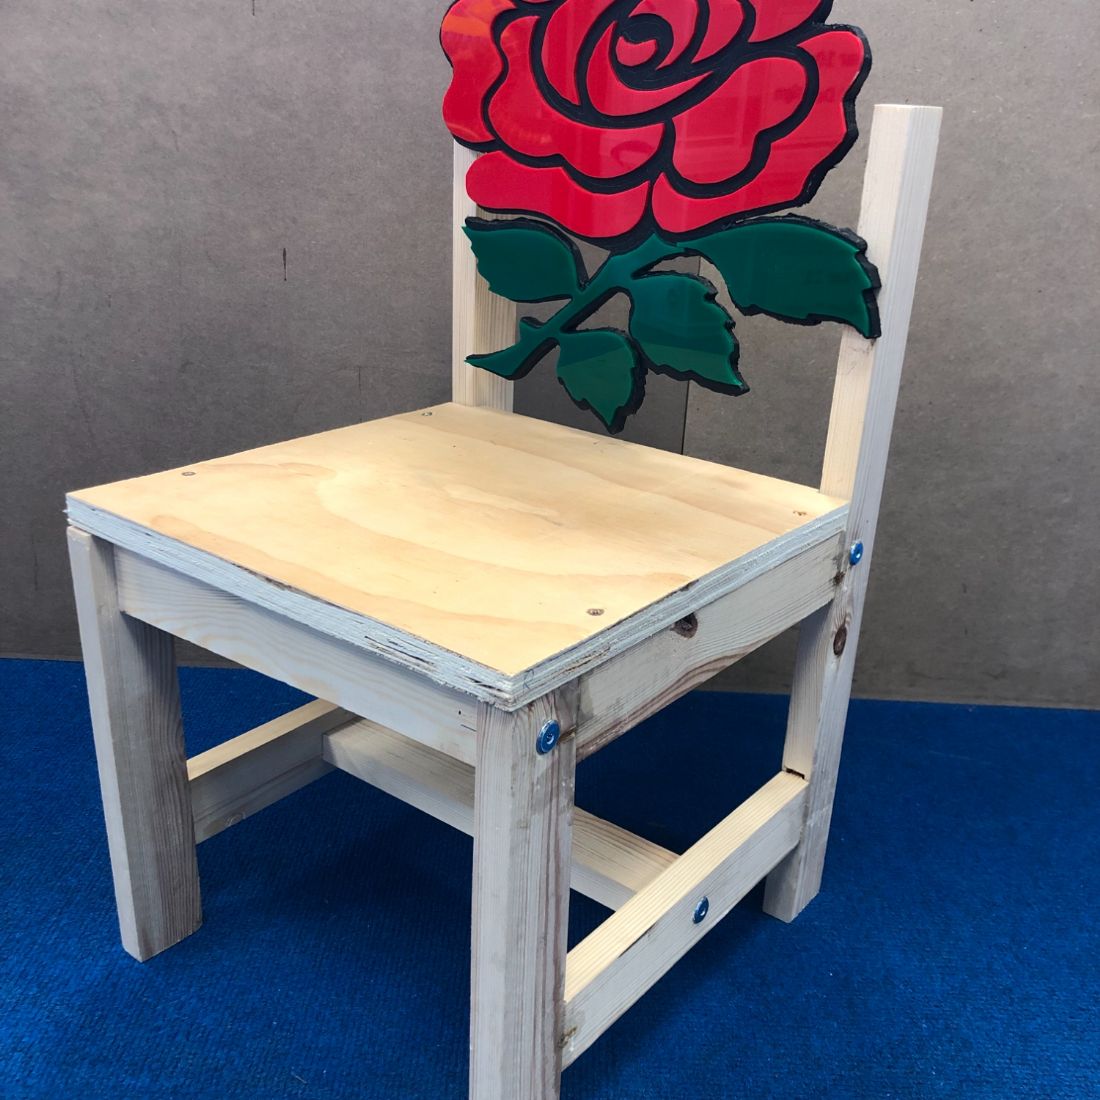 Product Design - Year 10 - Children's Chair Project